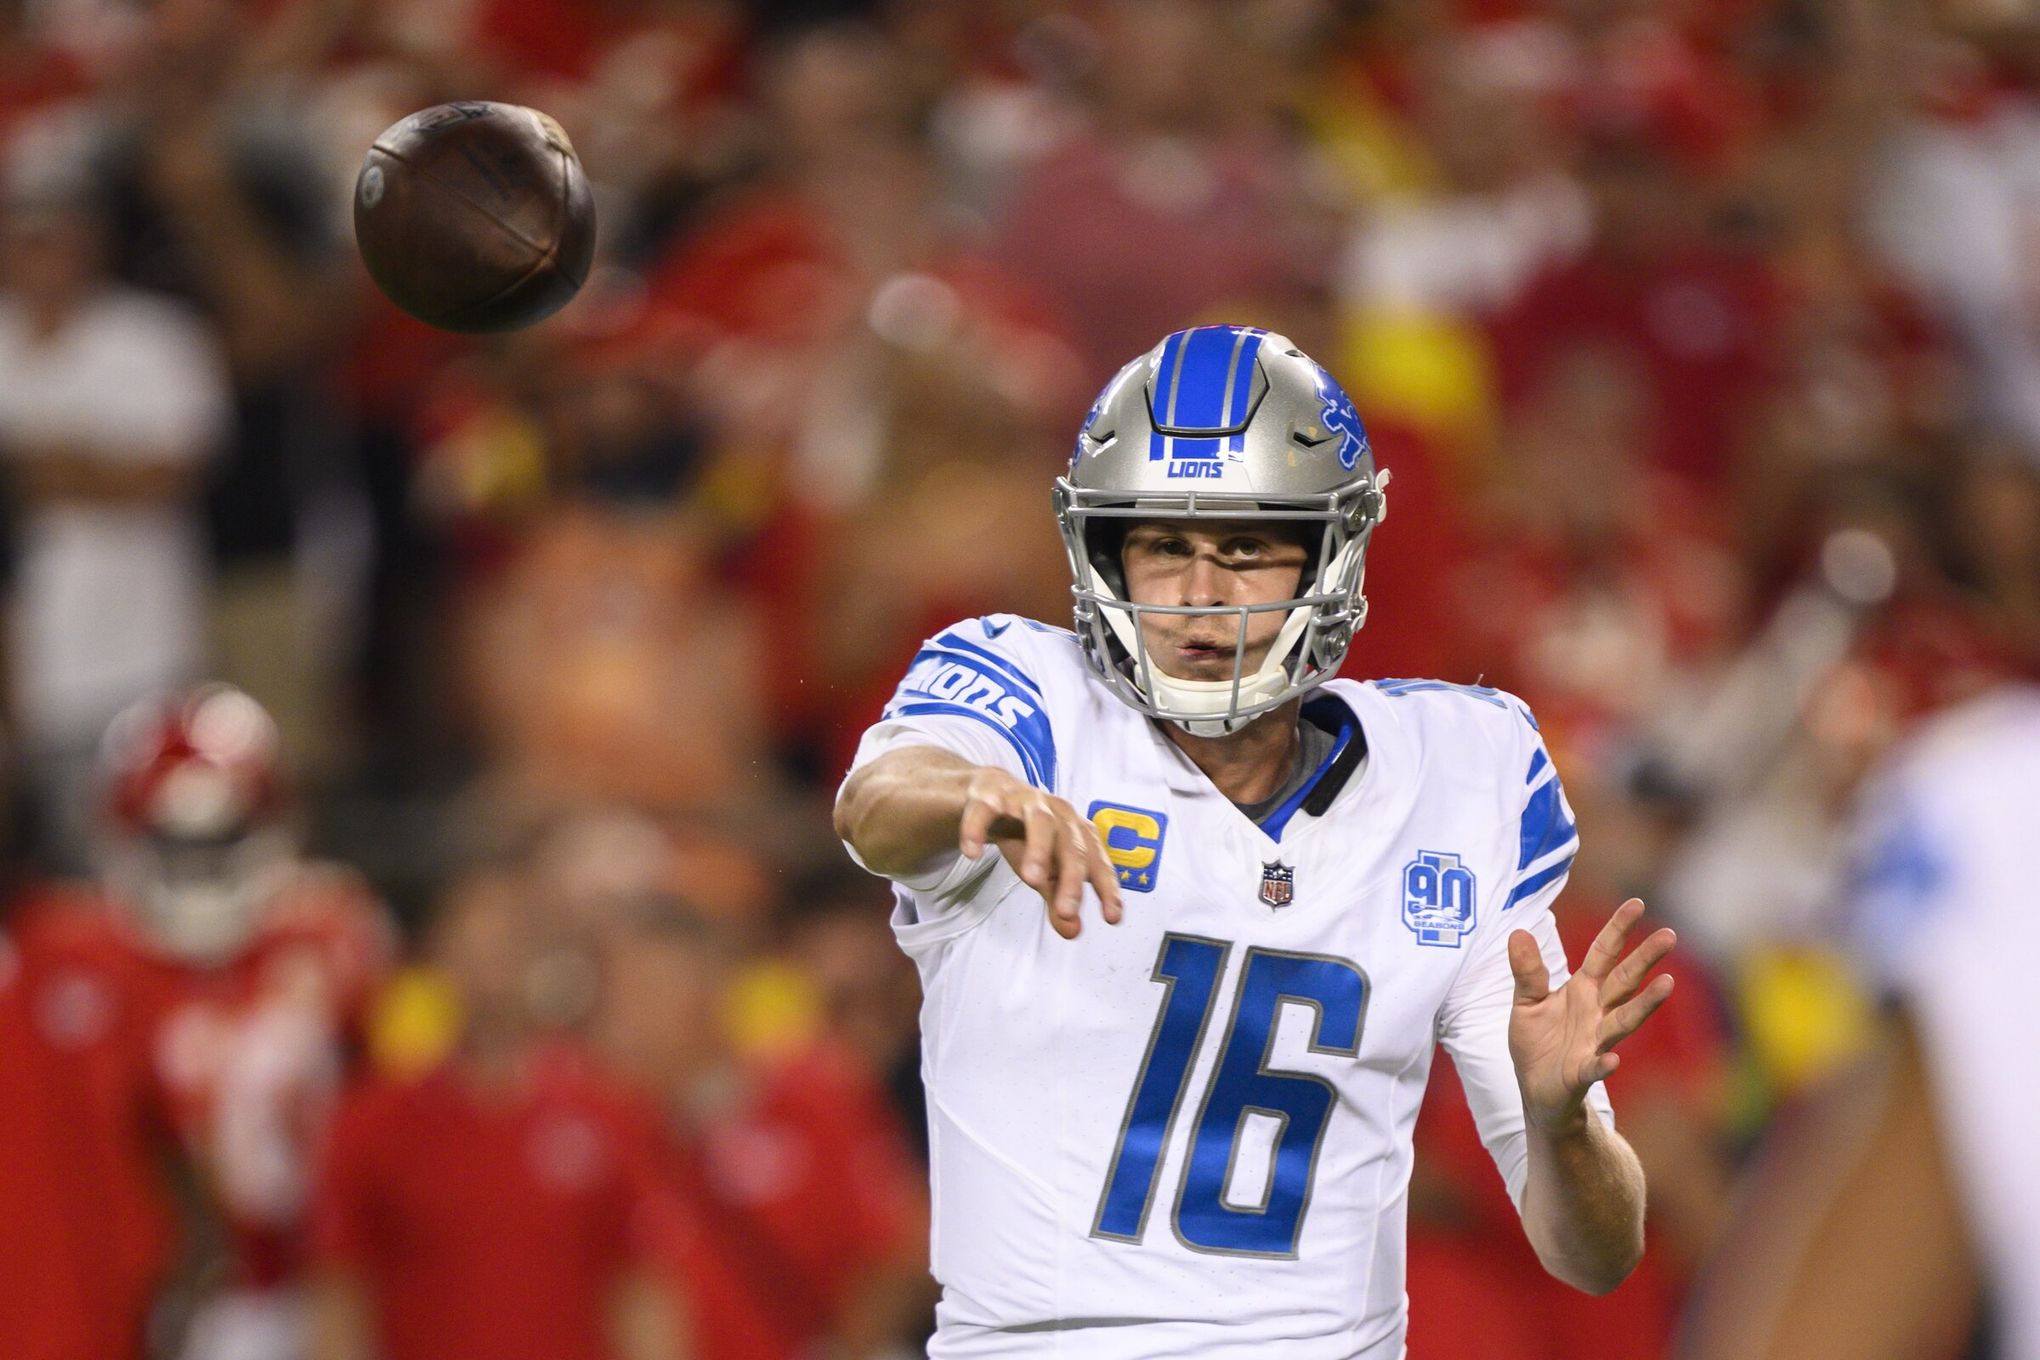 What to know about the Seahawks' Week 2 opponent, the Detroit Lions